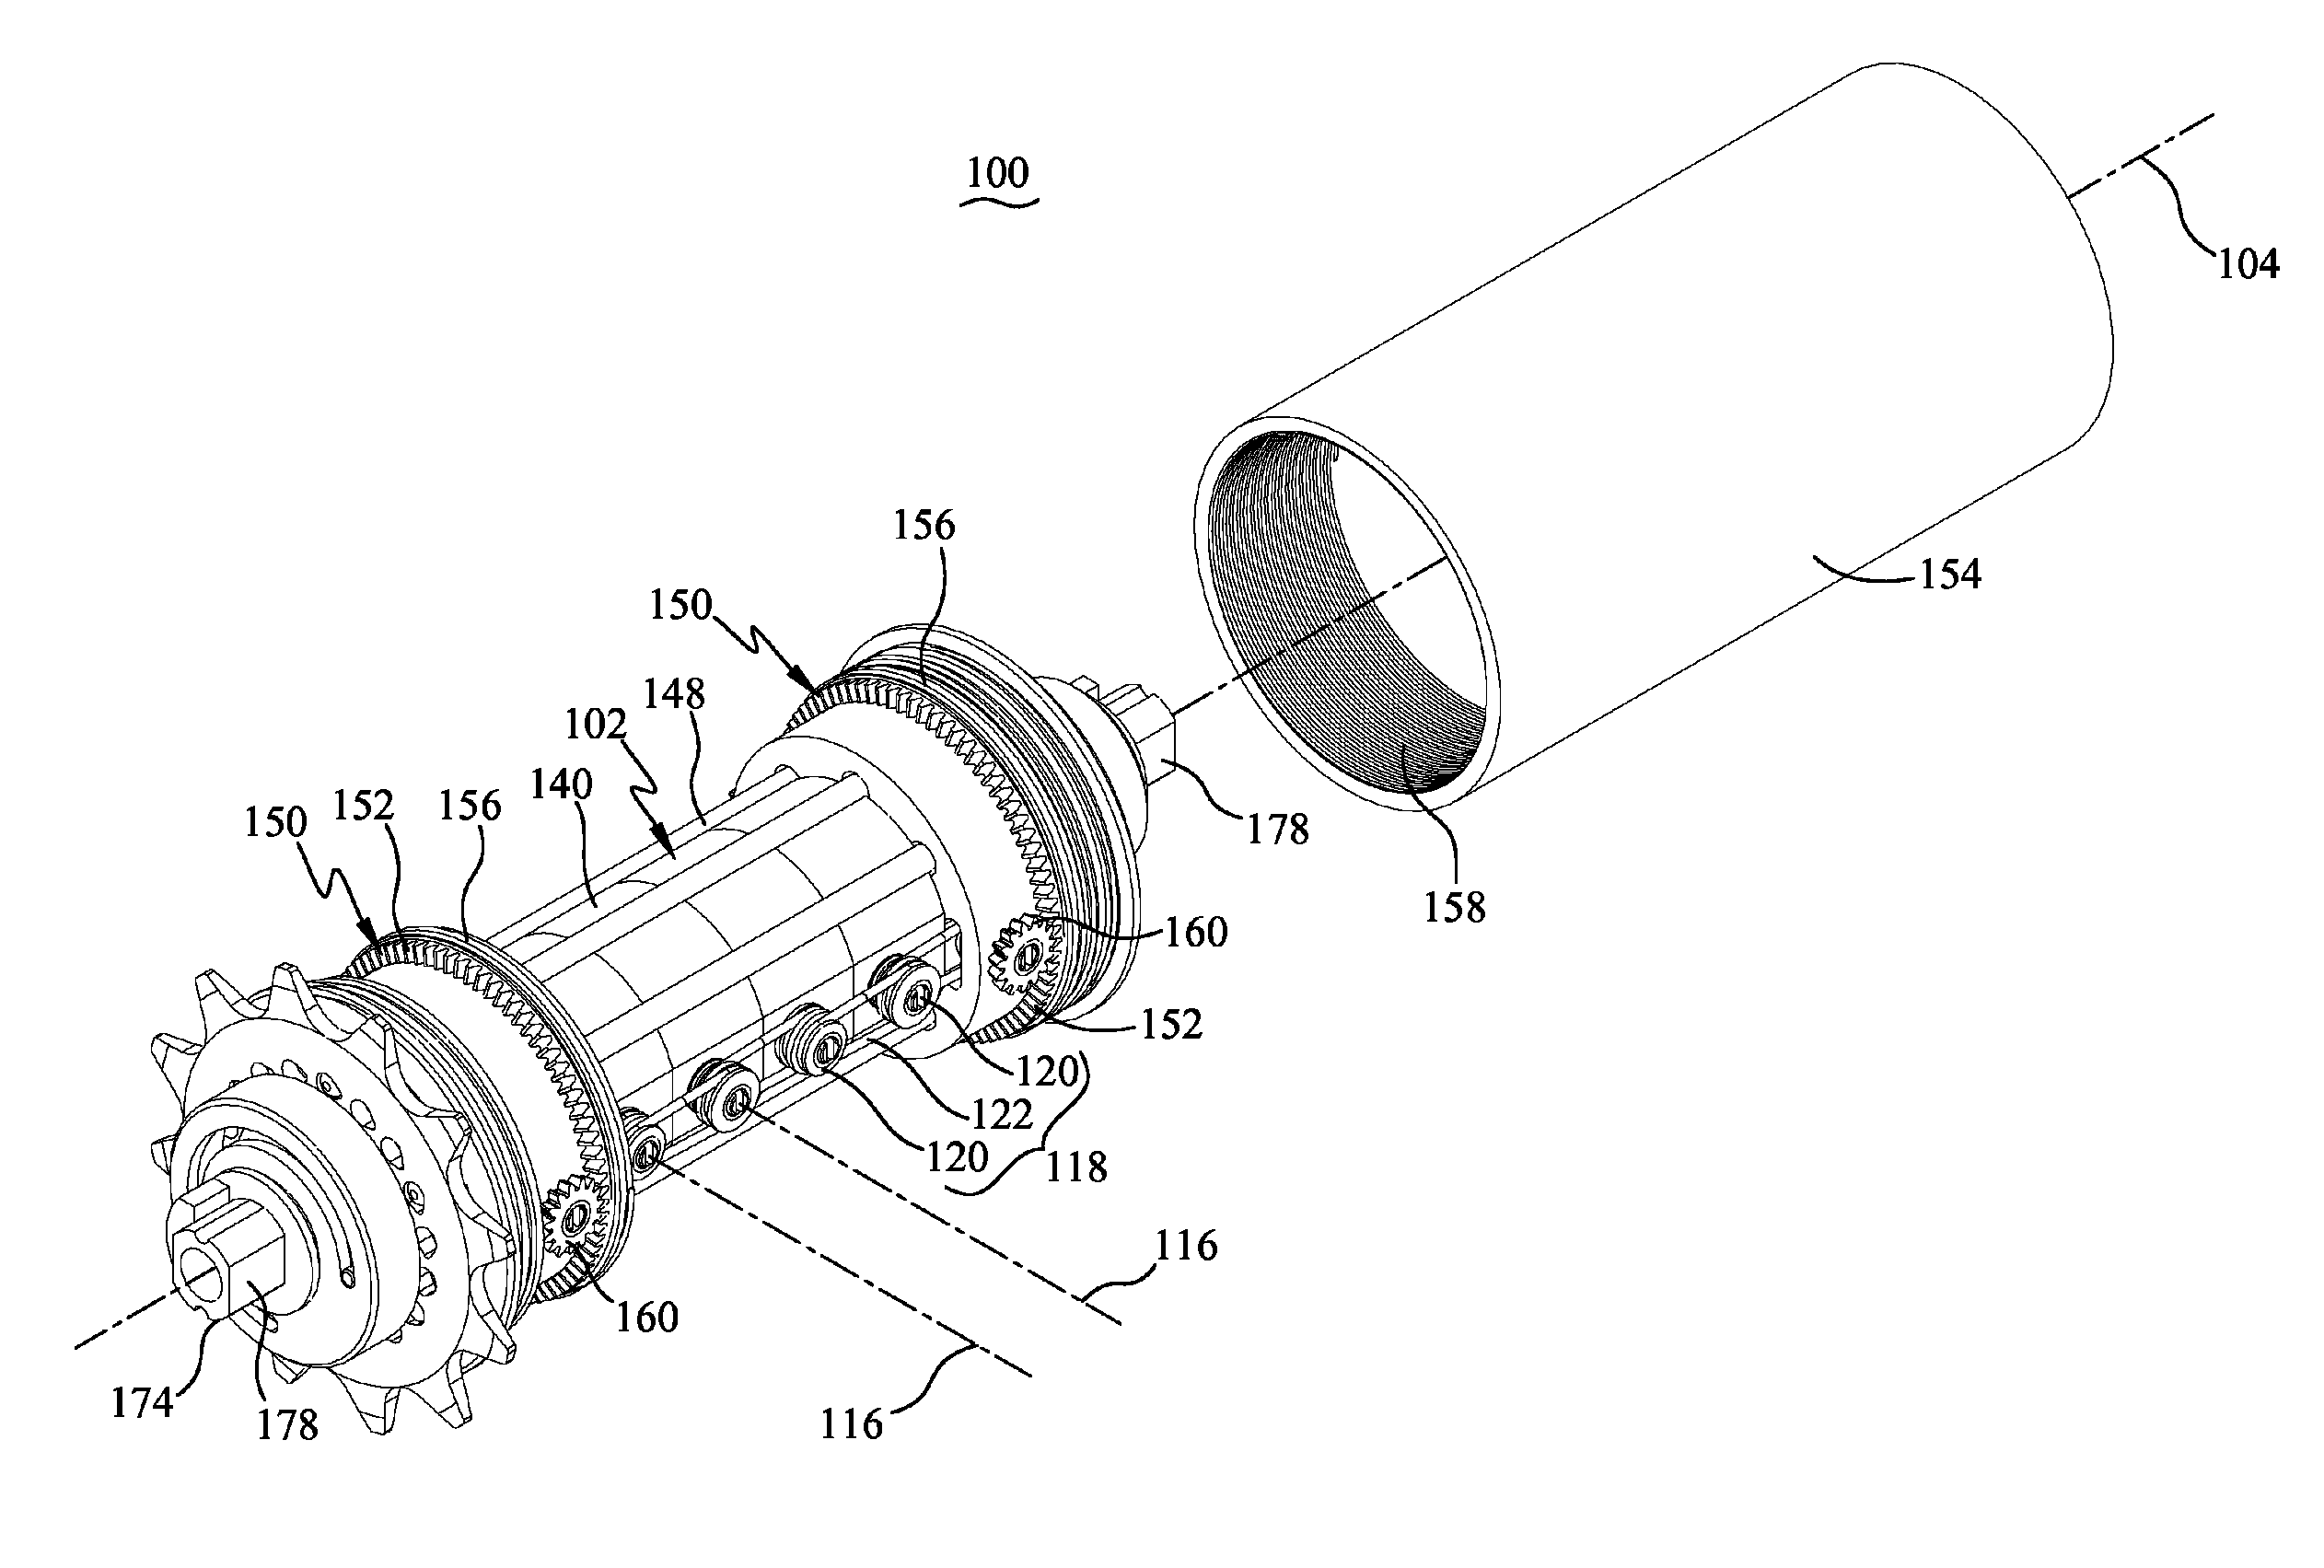 Multi-ratio transmission system with parallel vertical and coaxial planet gears